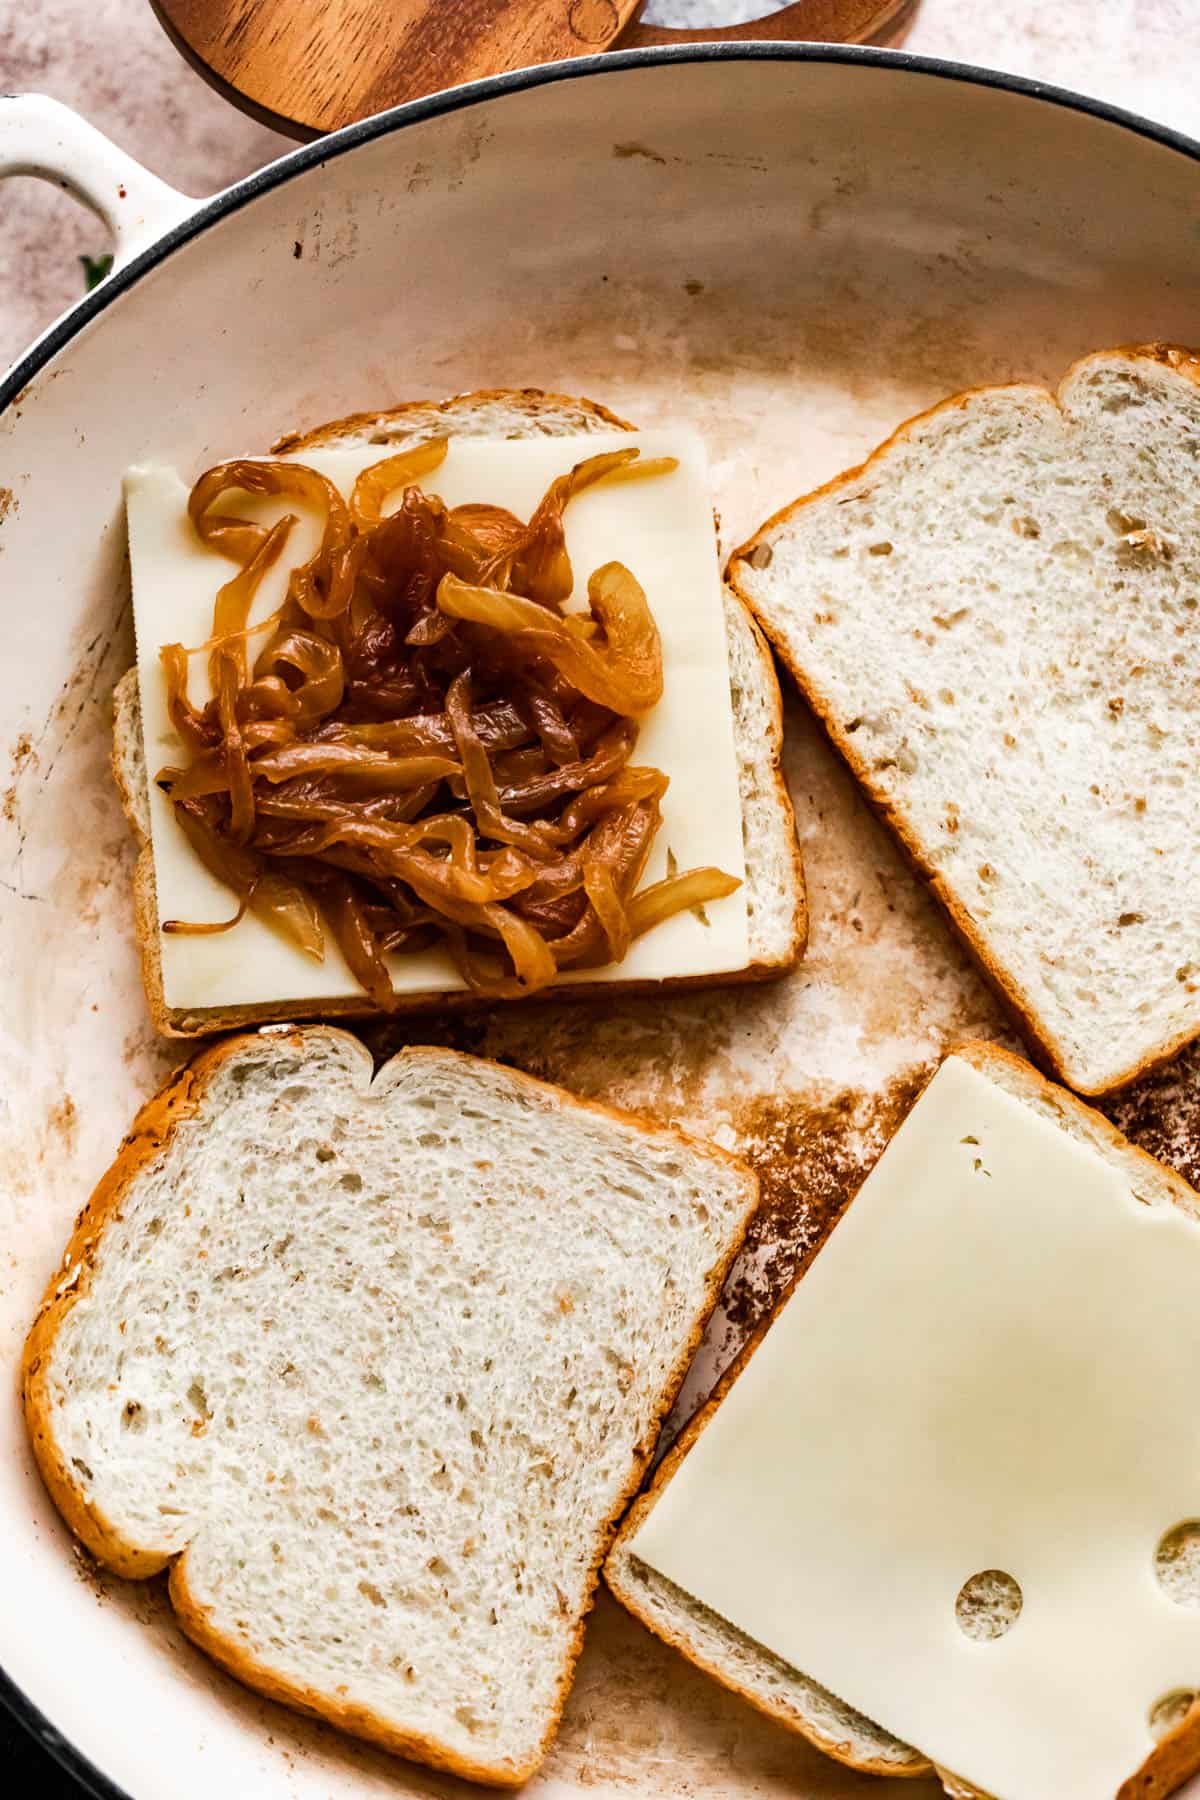 four bread slices in a skillet, with two of the bread slices topped with slices of cheese and one bread slice is topped with caramelized onions.